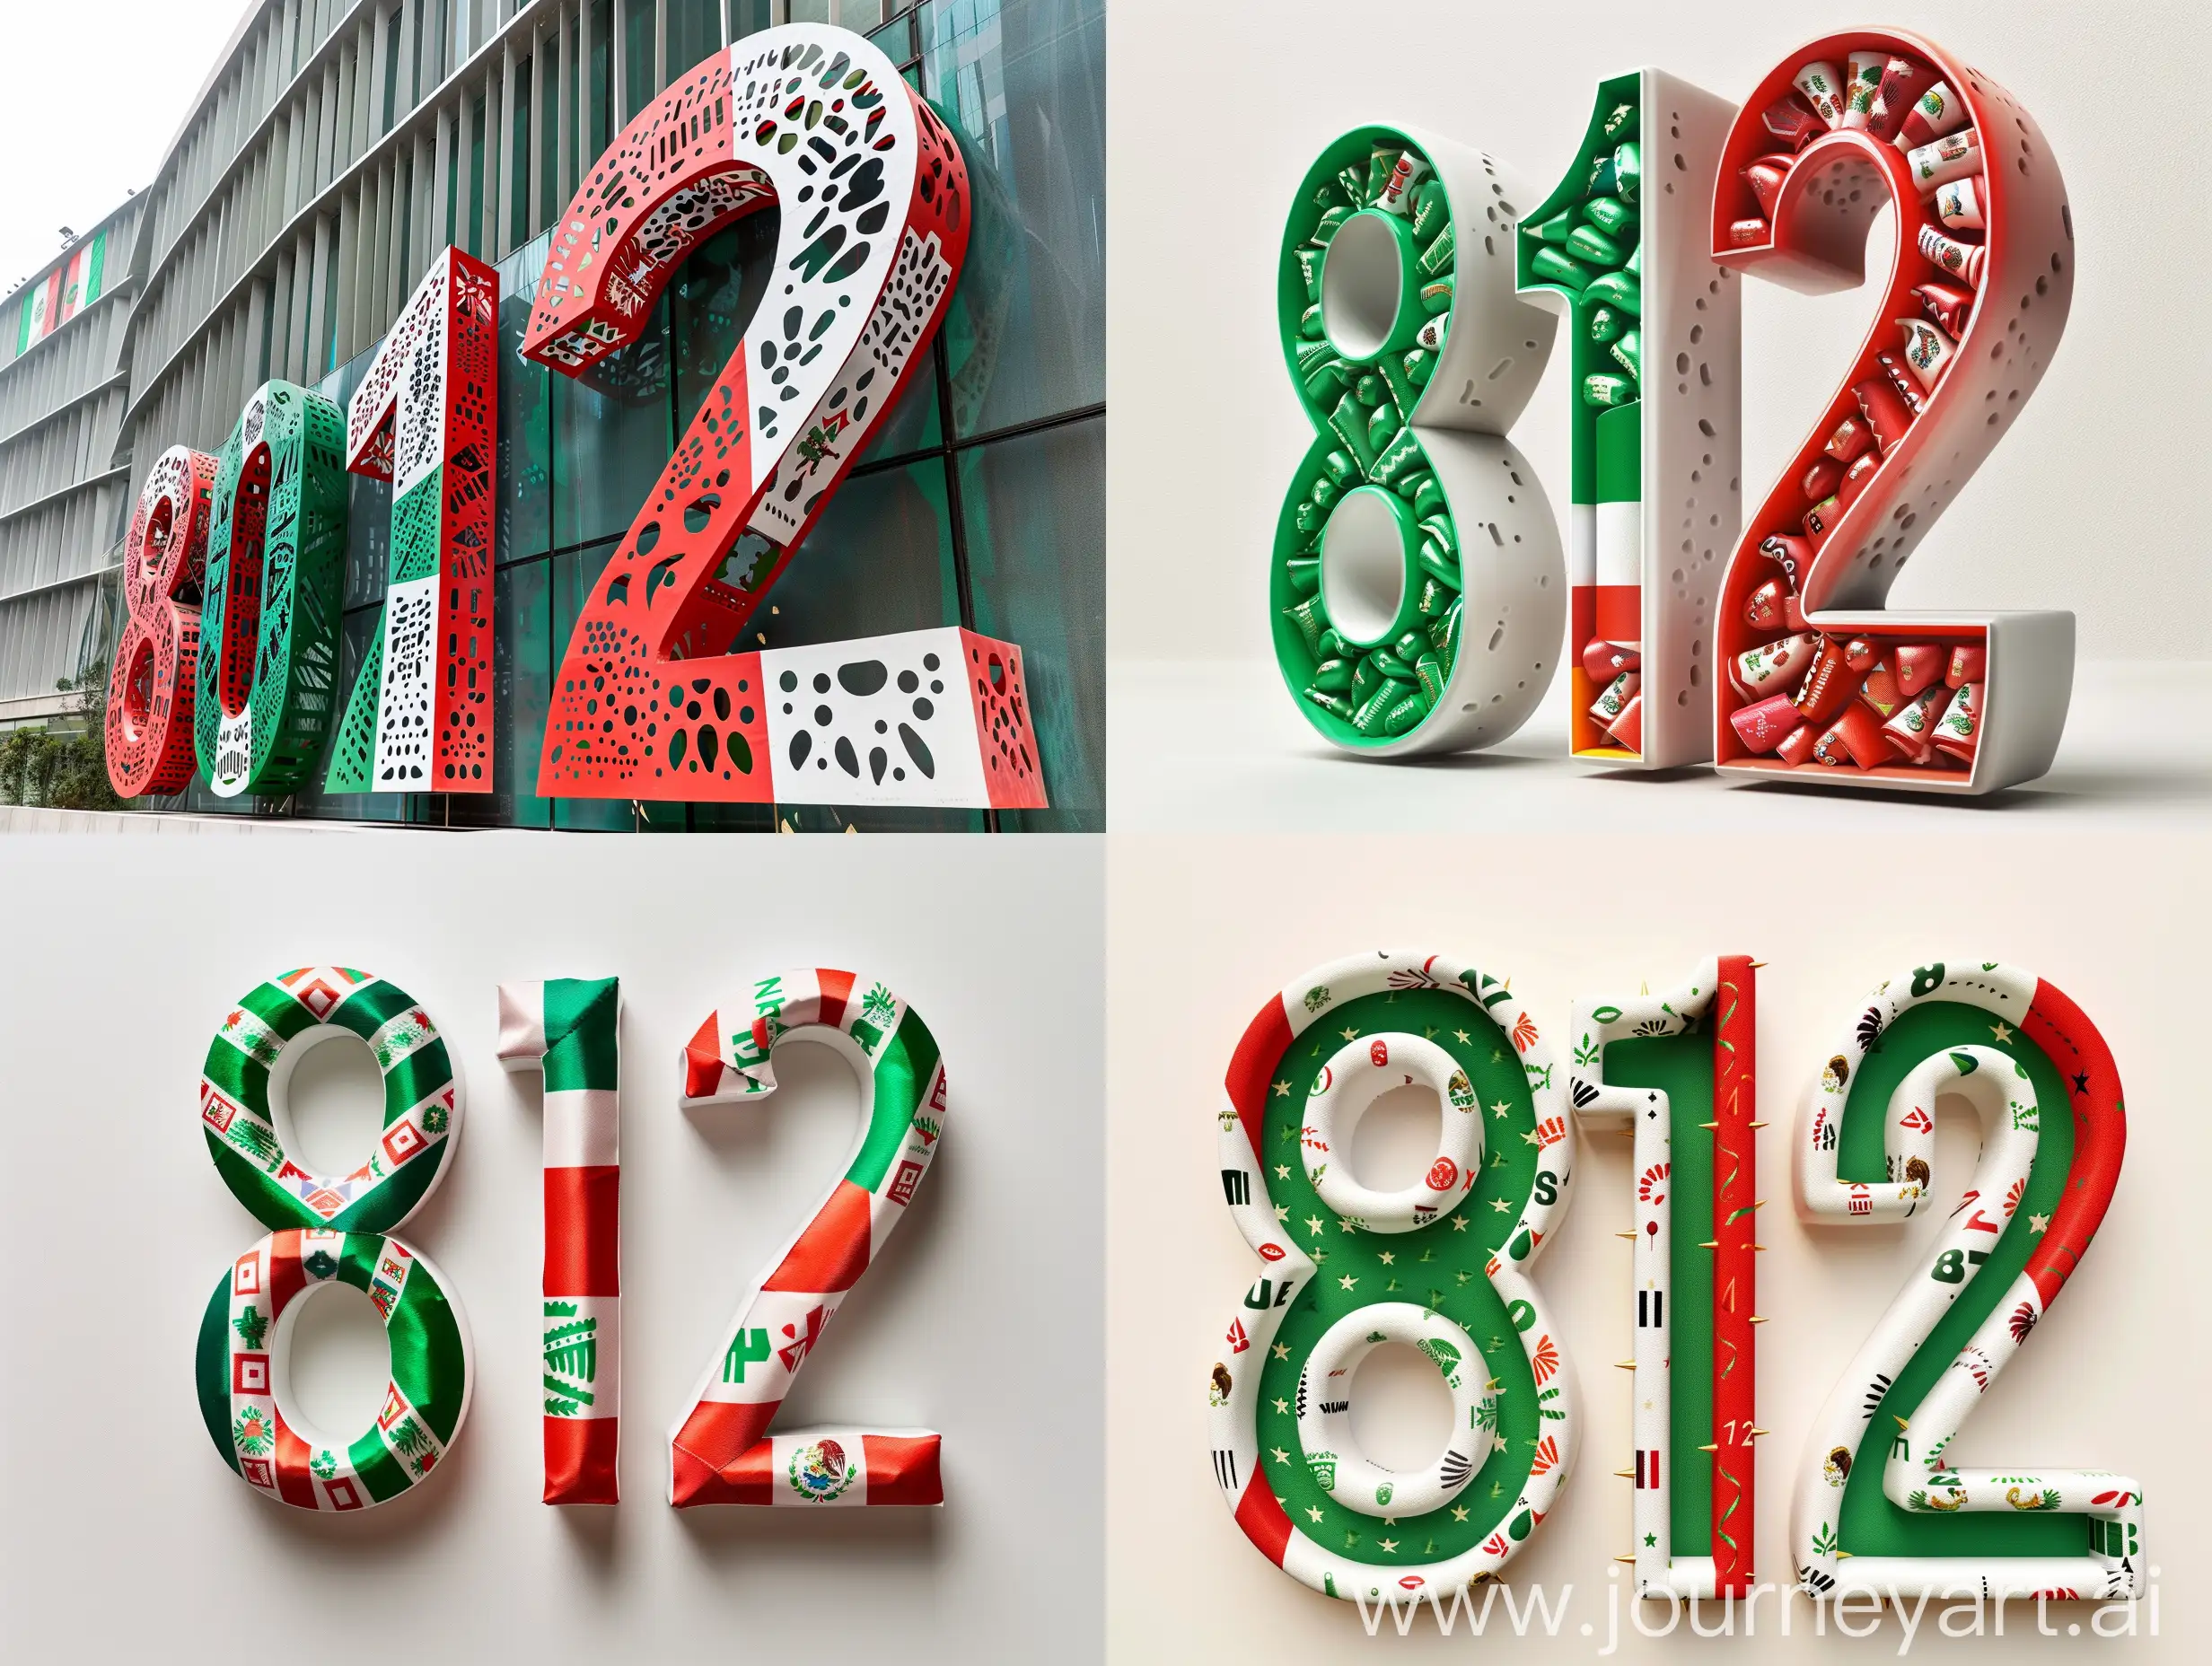 The numbers 812 decorated in Mexican flags